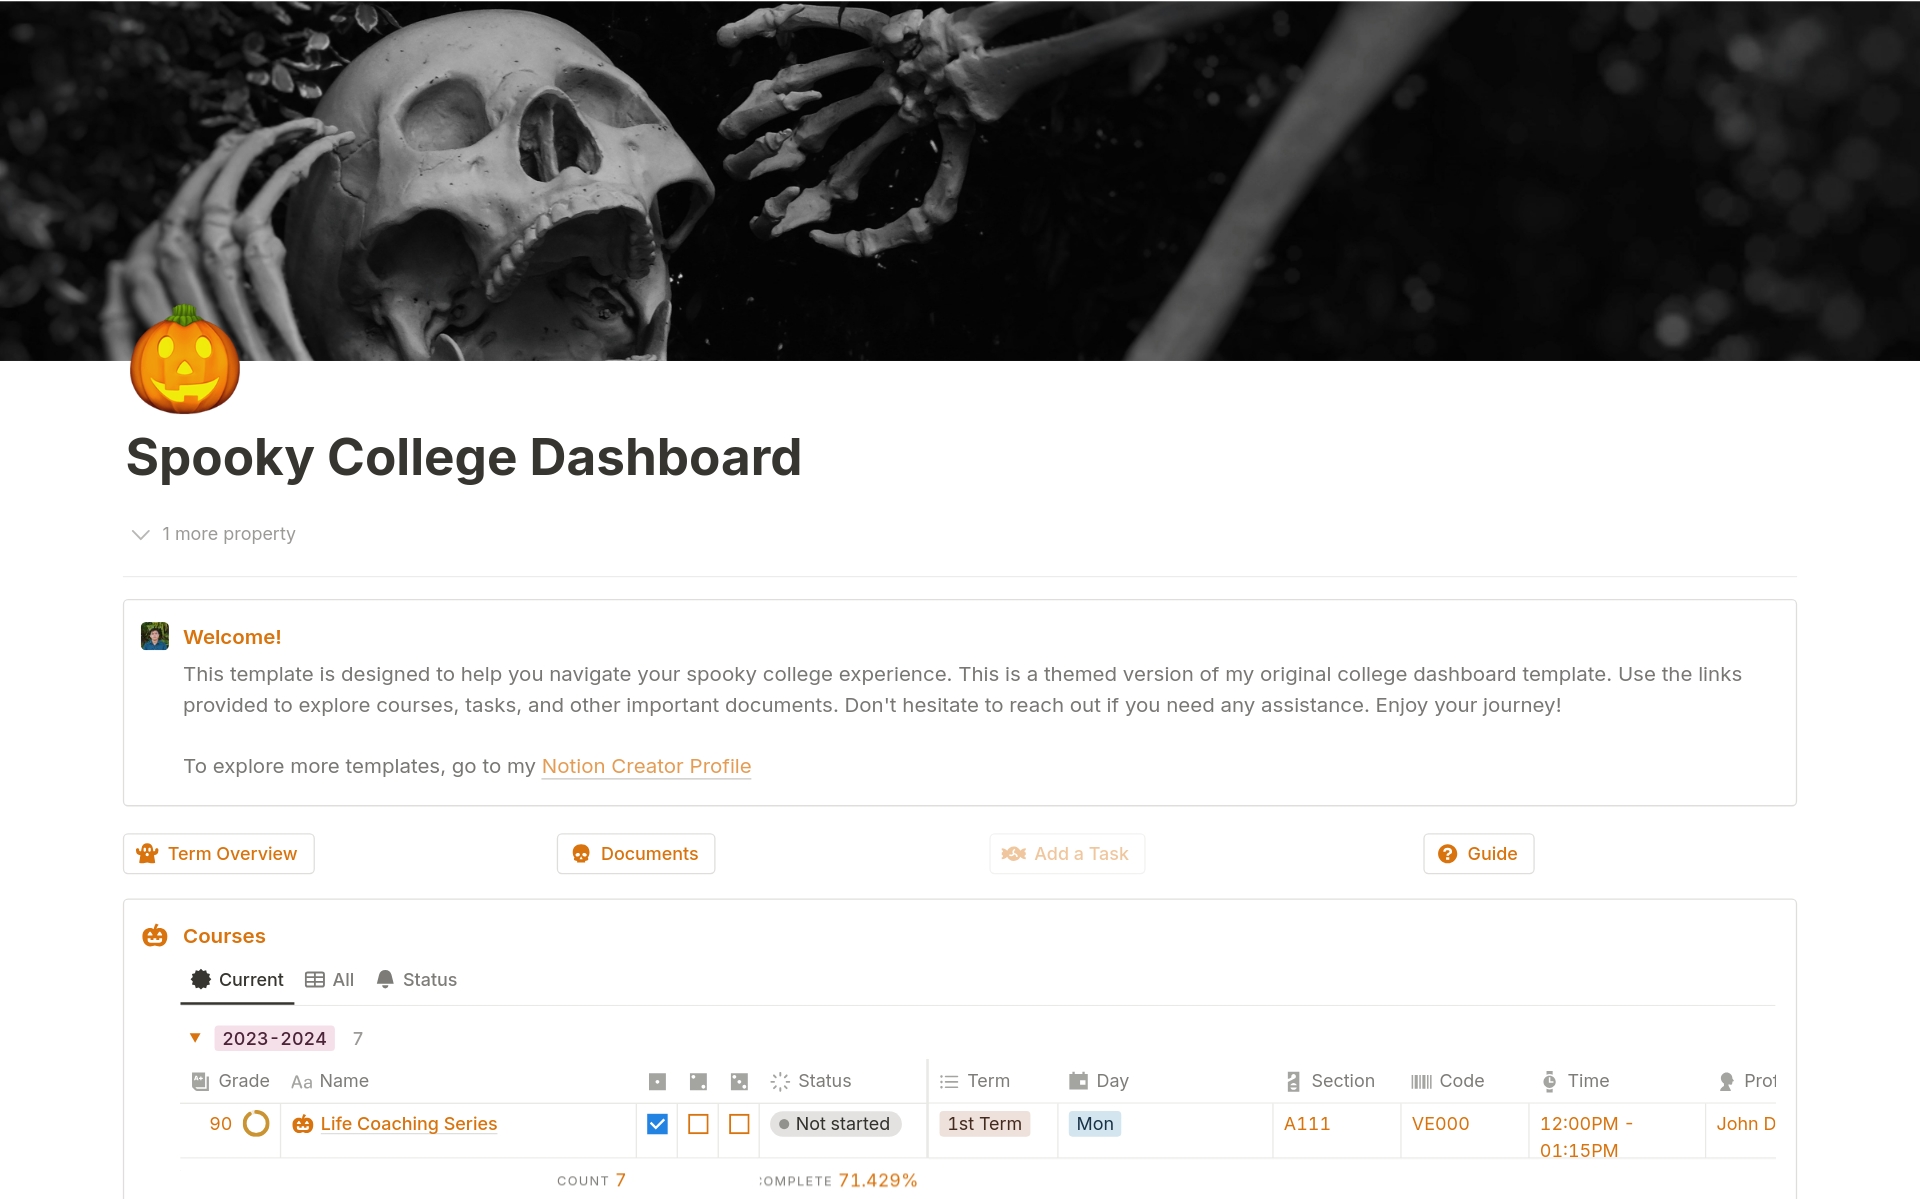 A dashboard for college courses and school tasks (but spookier).